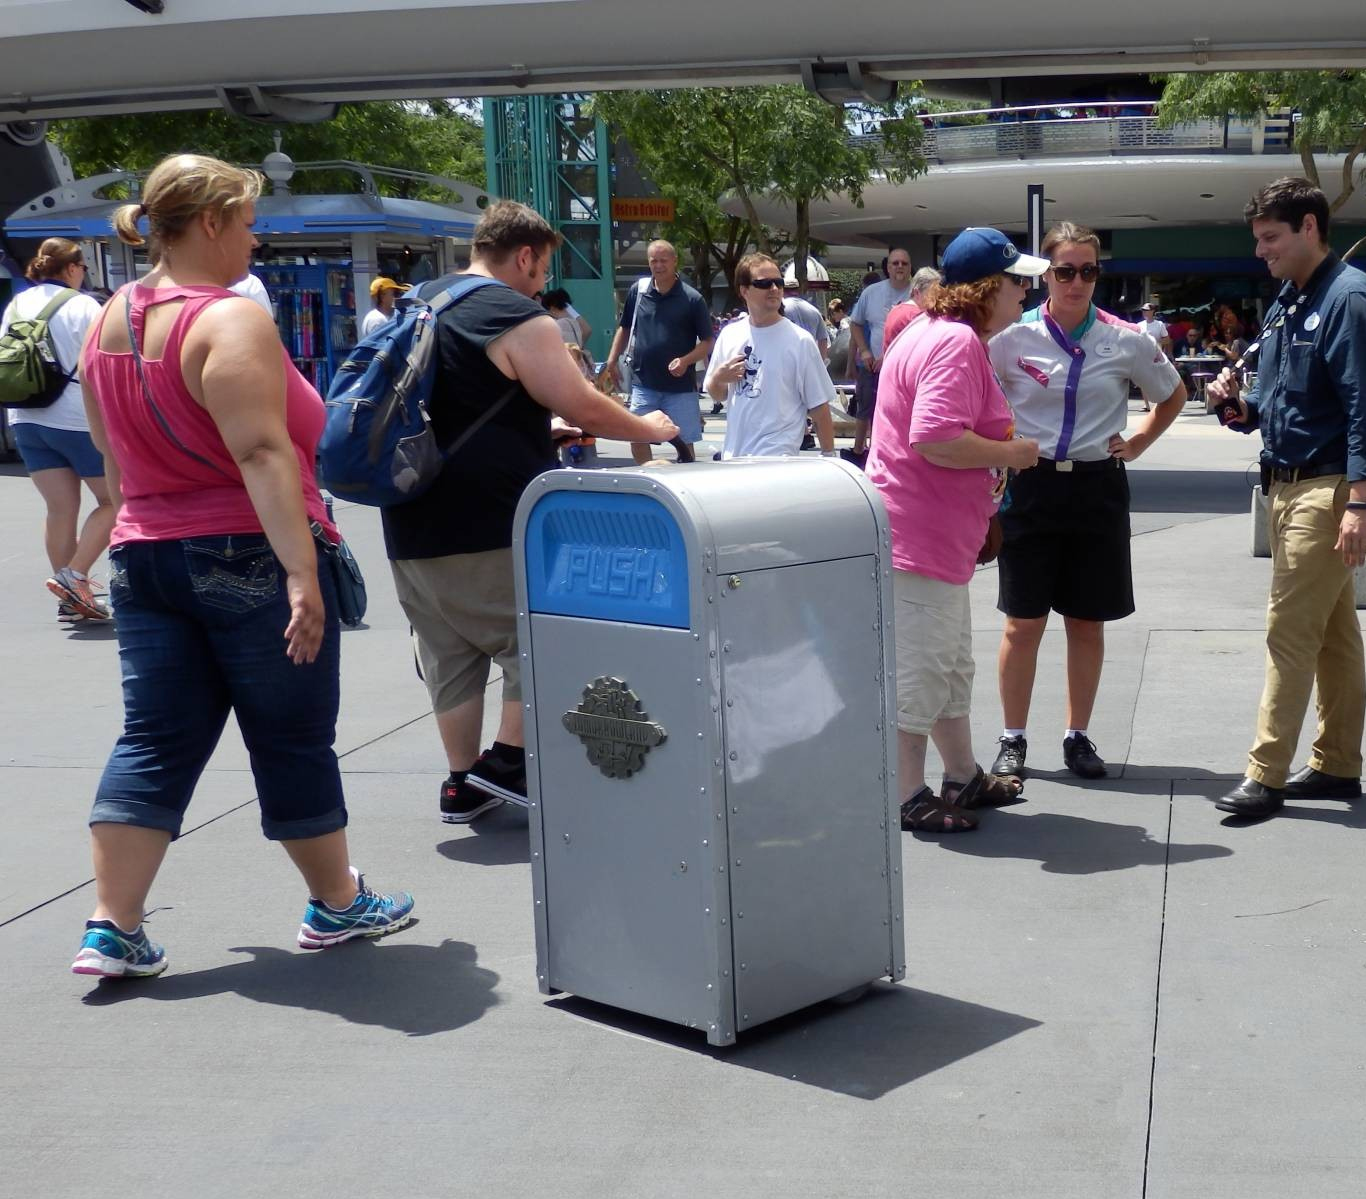 Learn what NOT to do while at Walt Disney World |PassPorter.com